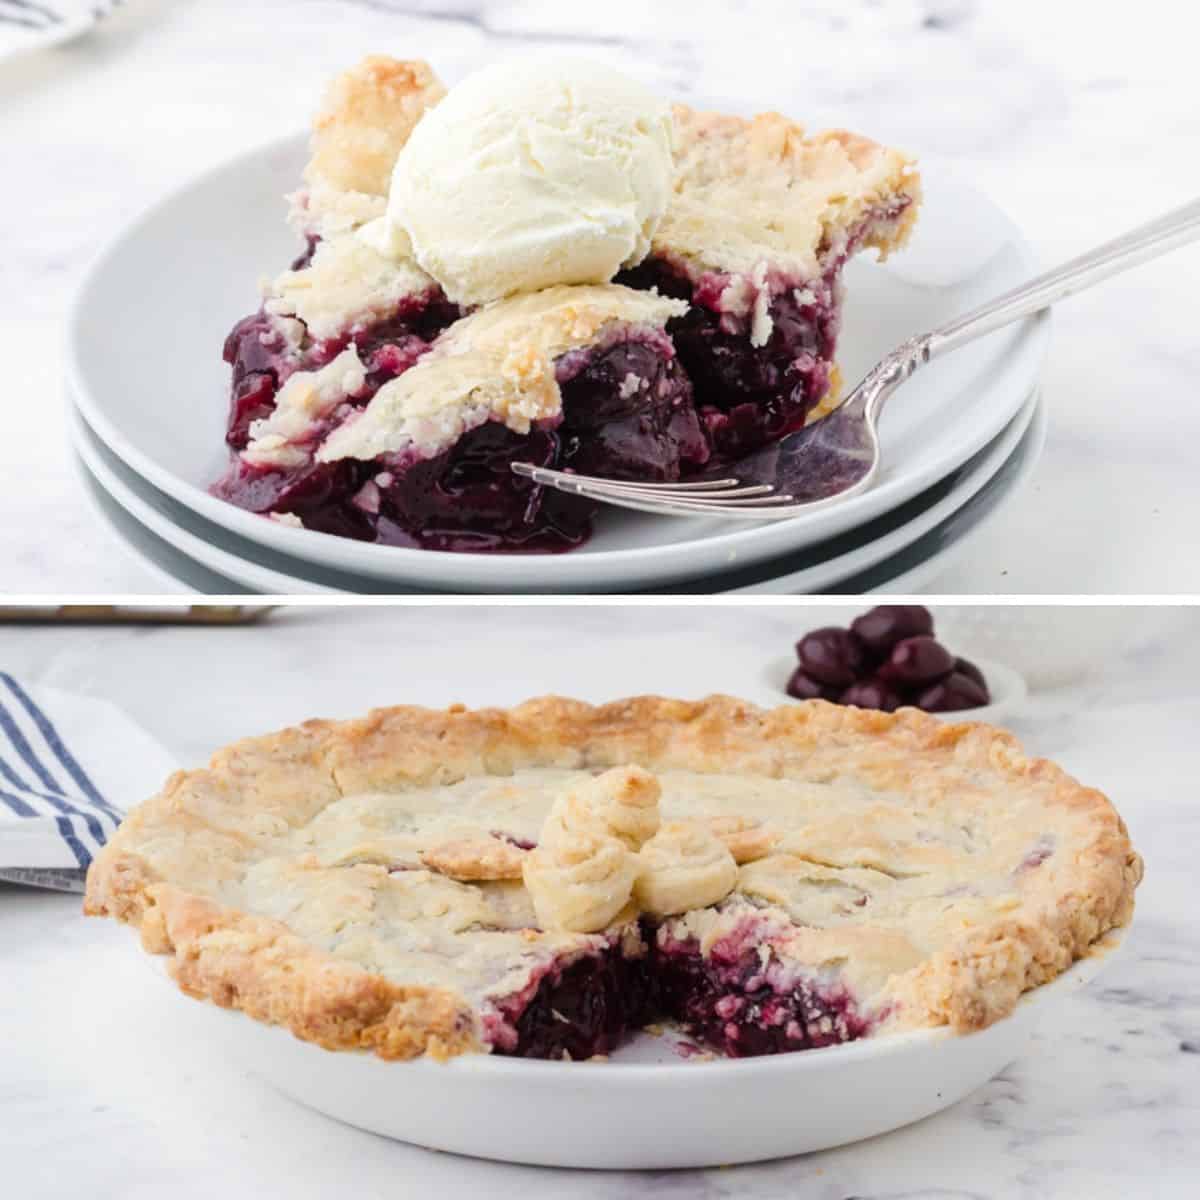 CHERRY PIE RECIPE WITH CANNED CHERRIES